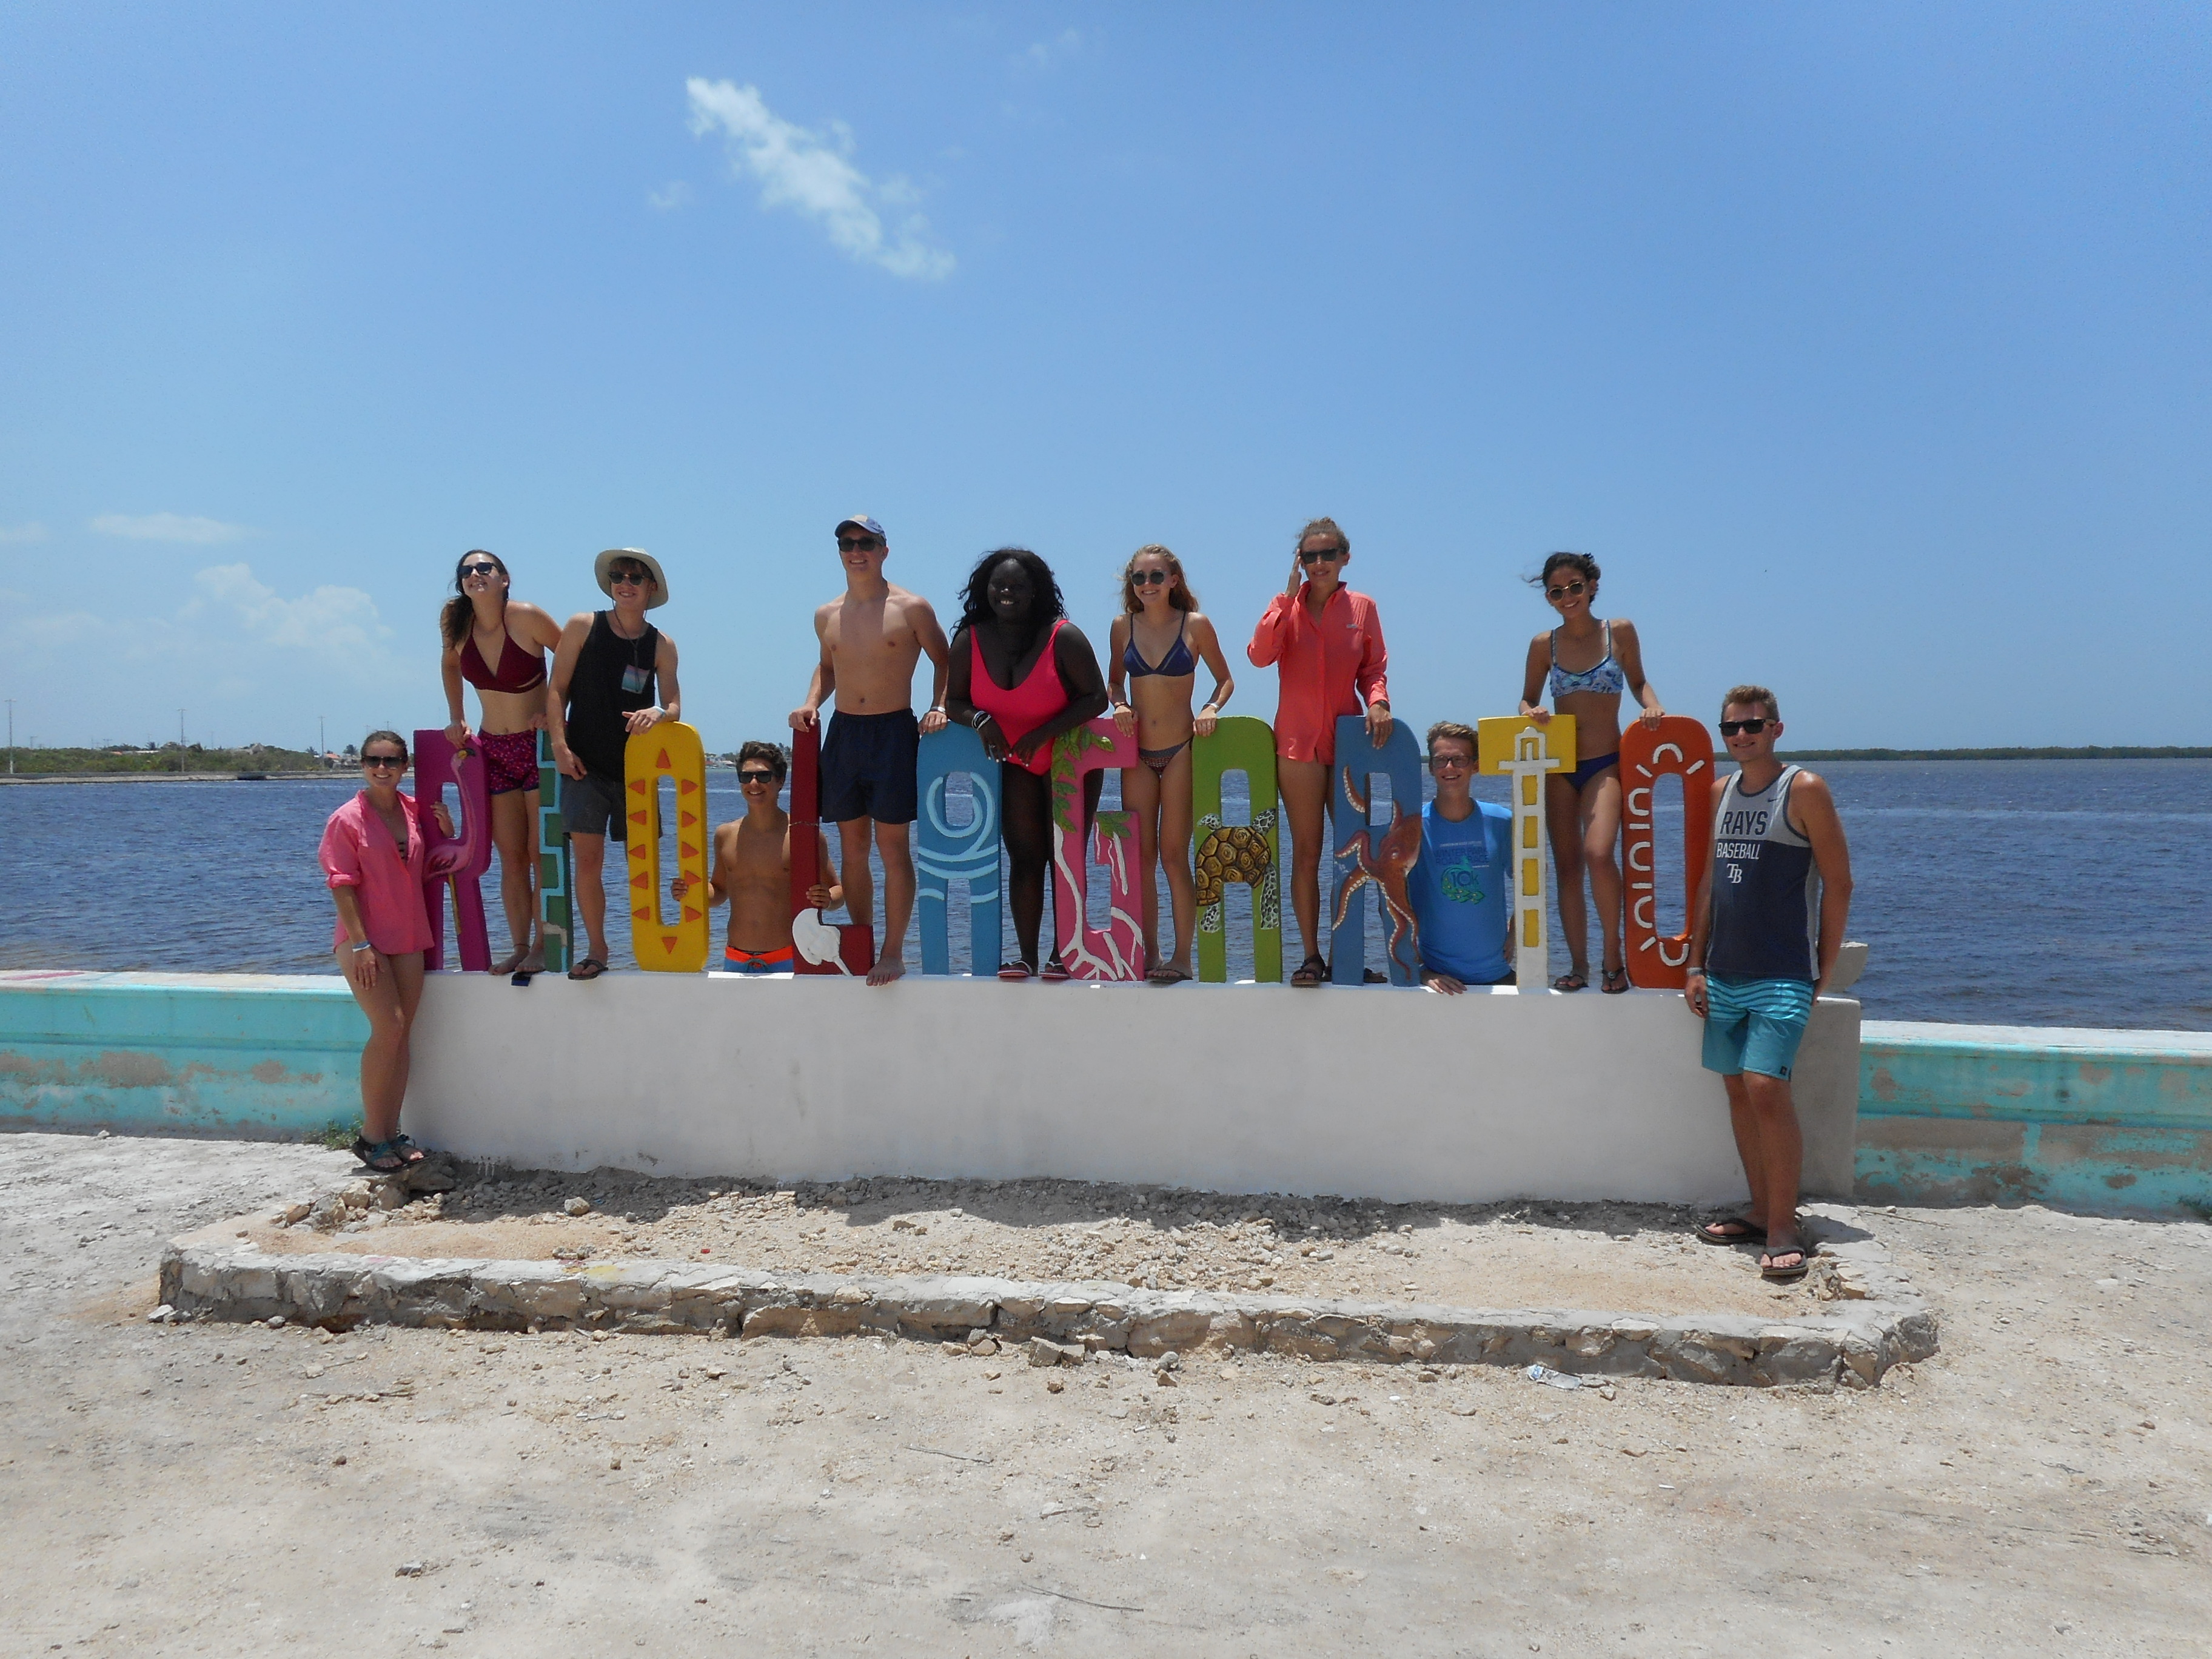 Group picture of students at beach